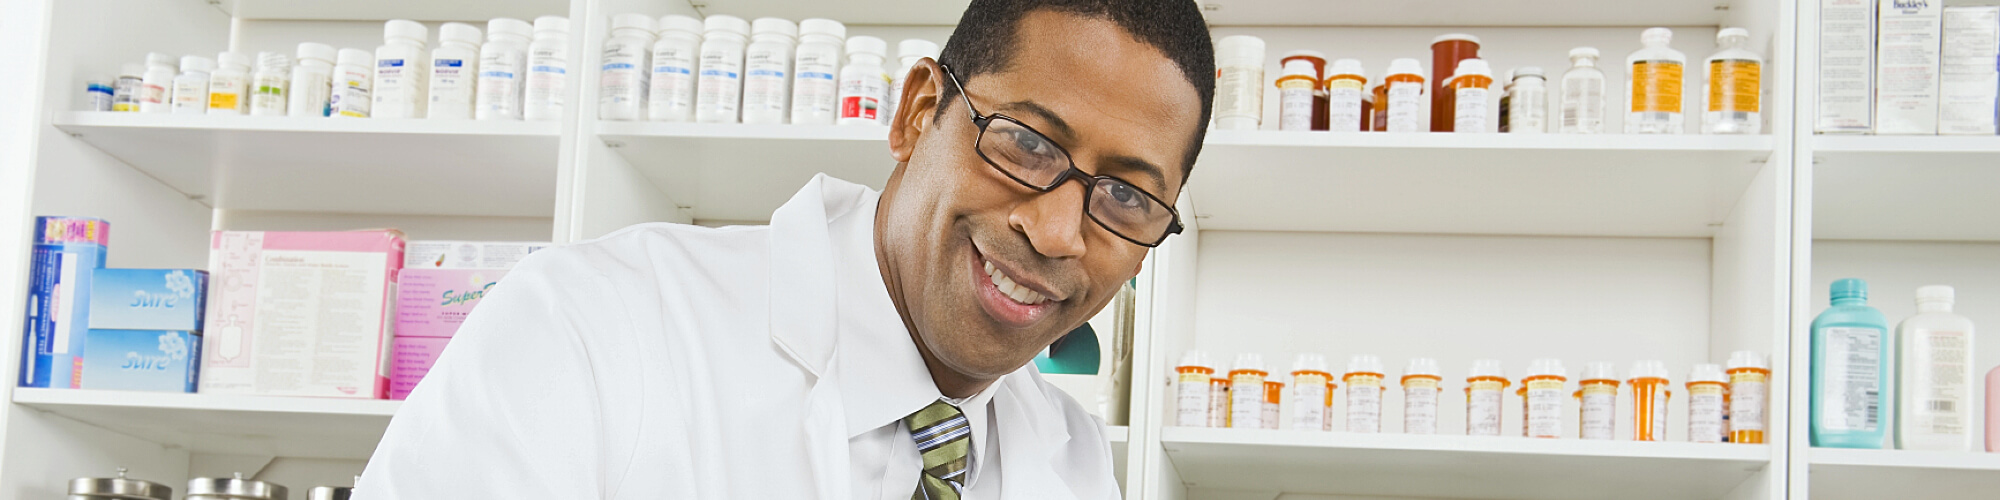 male pharmacist with glasses